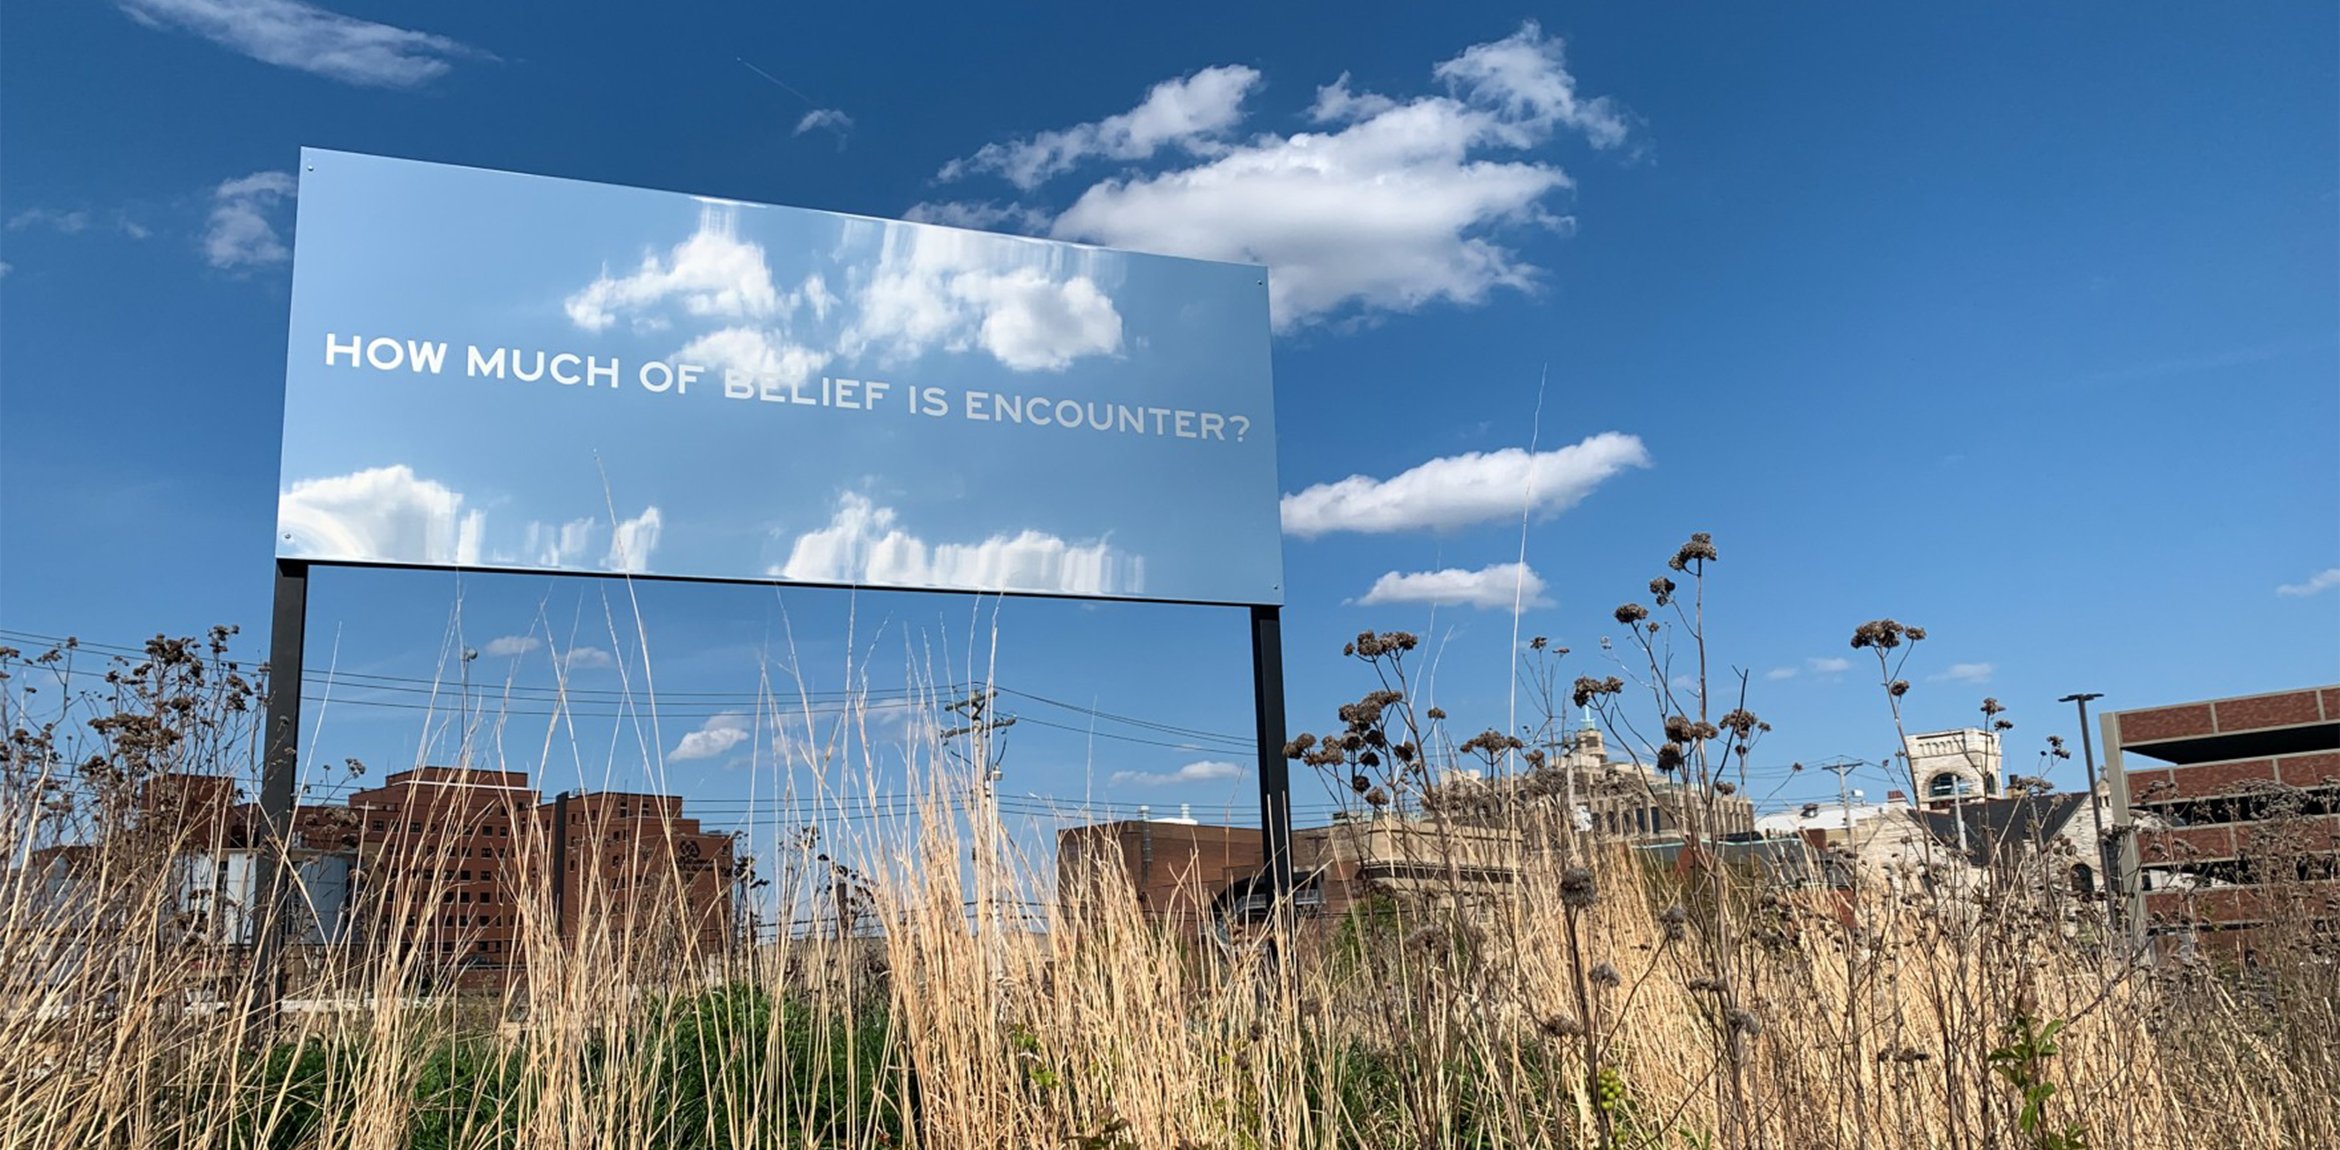 A mirrored billboard work with text by Chloë Bass installed outdoors in Park-Like